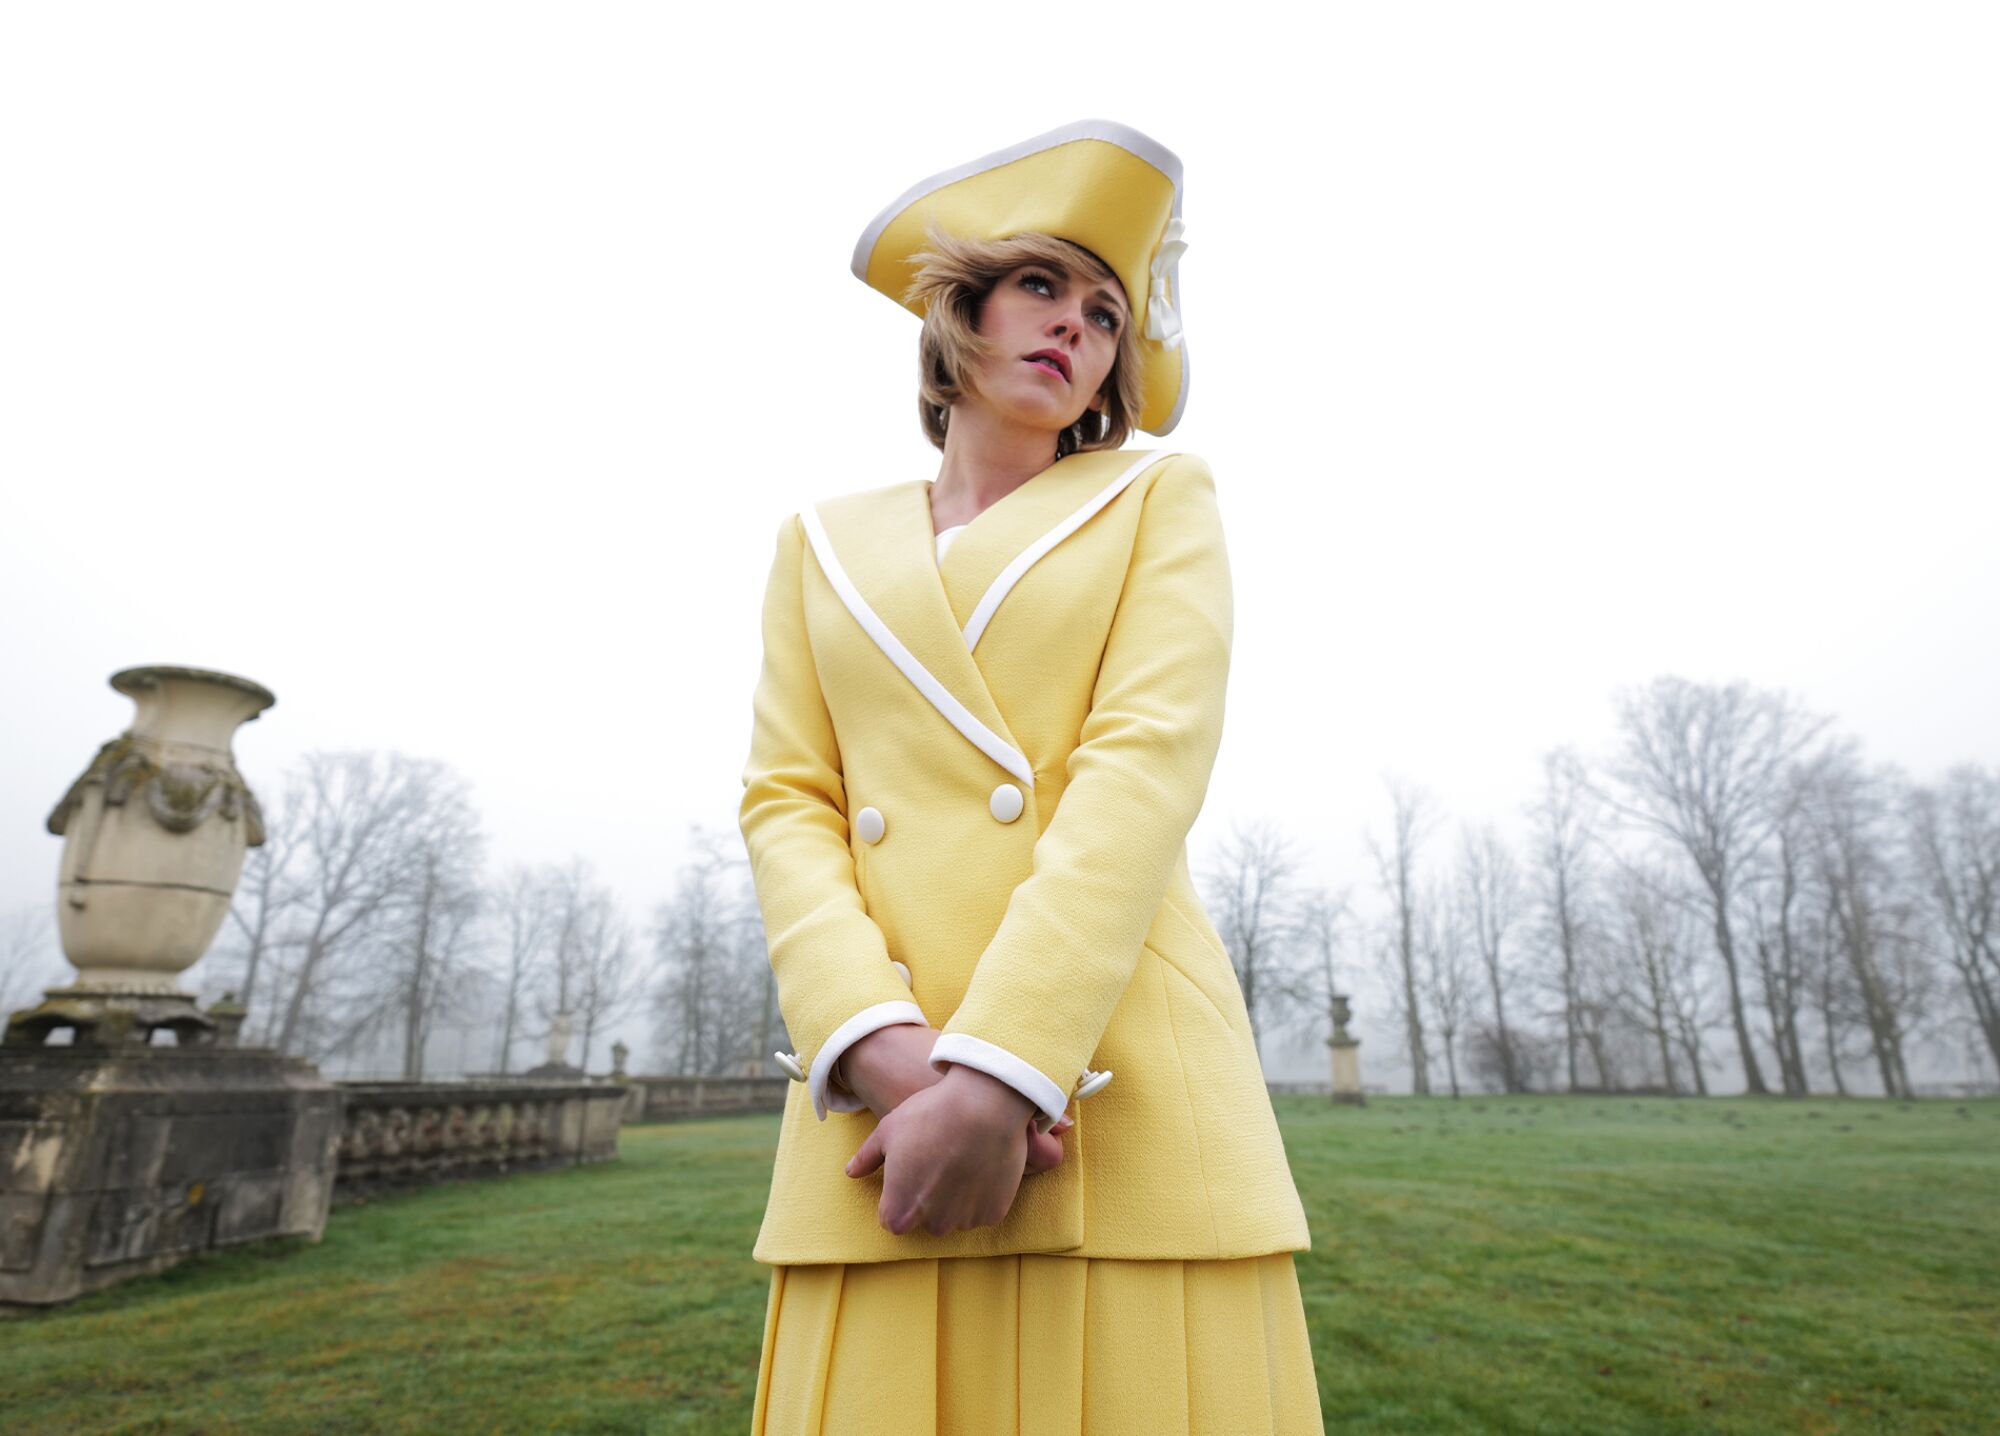 Kristen Stewart wears a yellow sailor suit with pirate hat as Princess Diana in "Spencer."